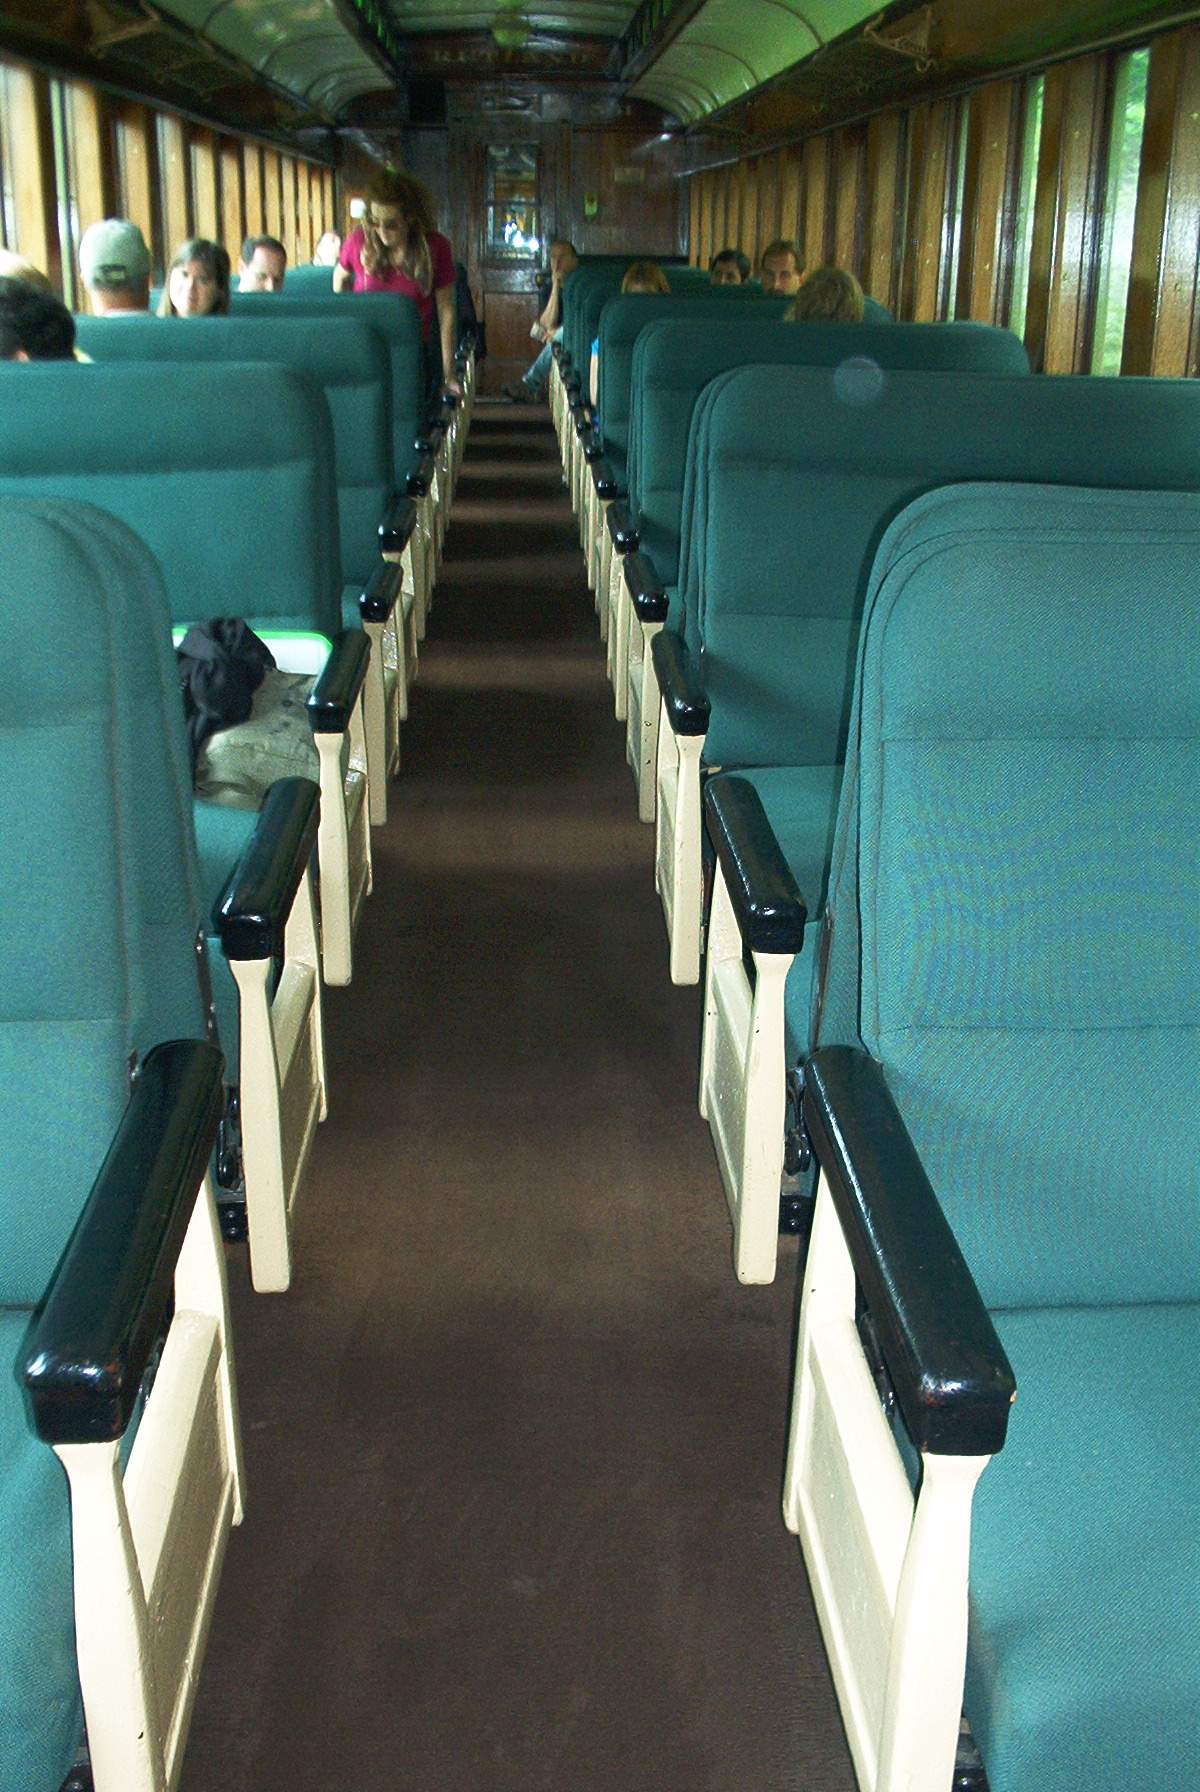 a large green bus with several seats and people sitting in it